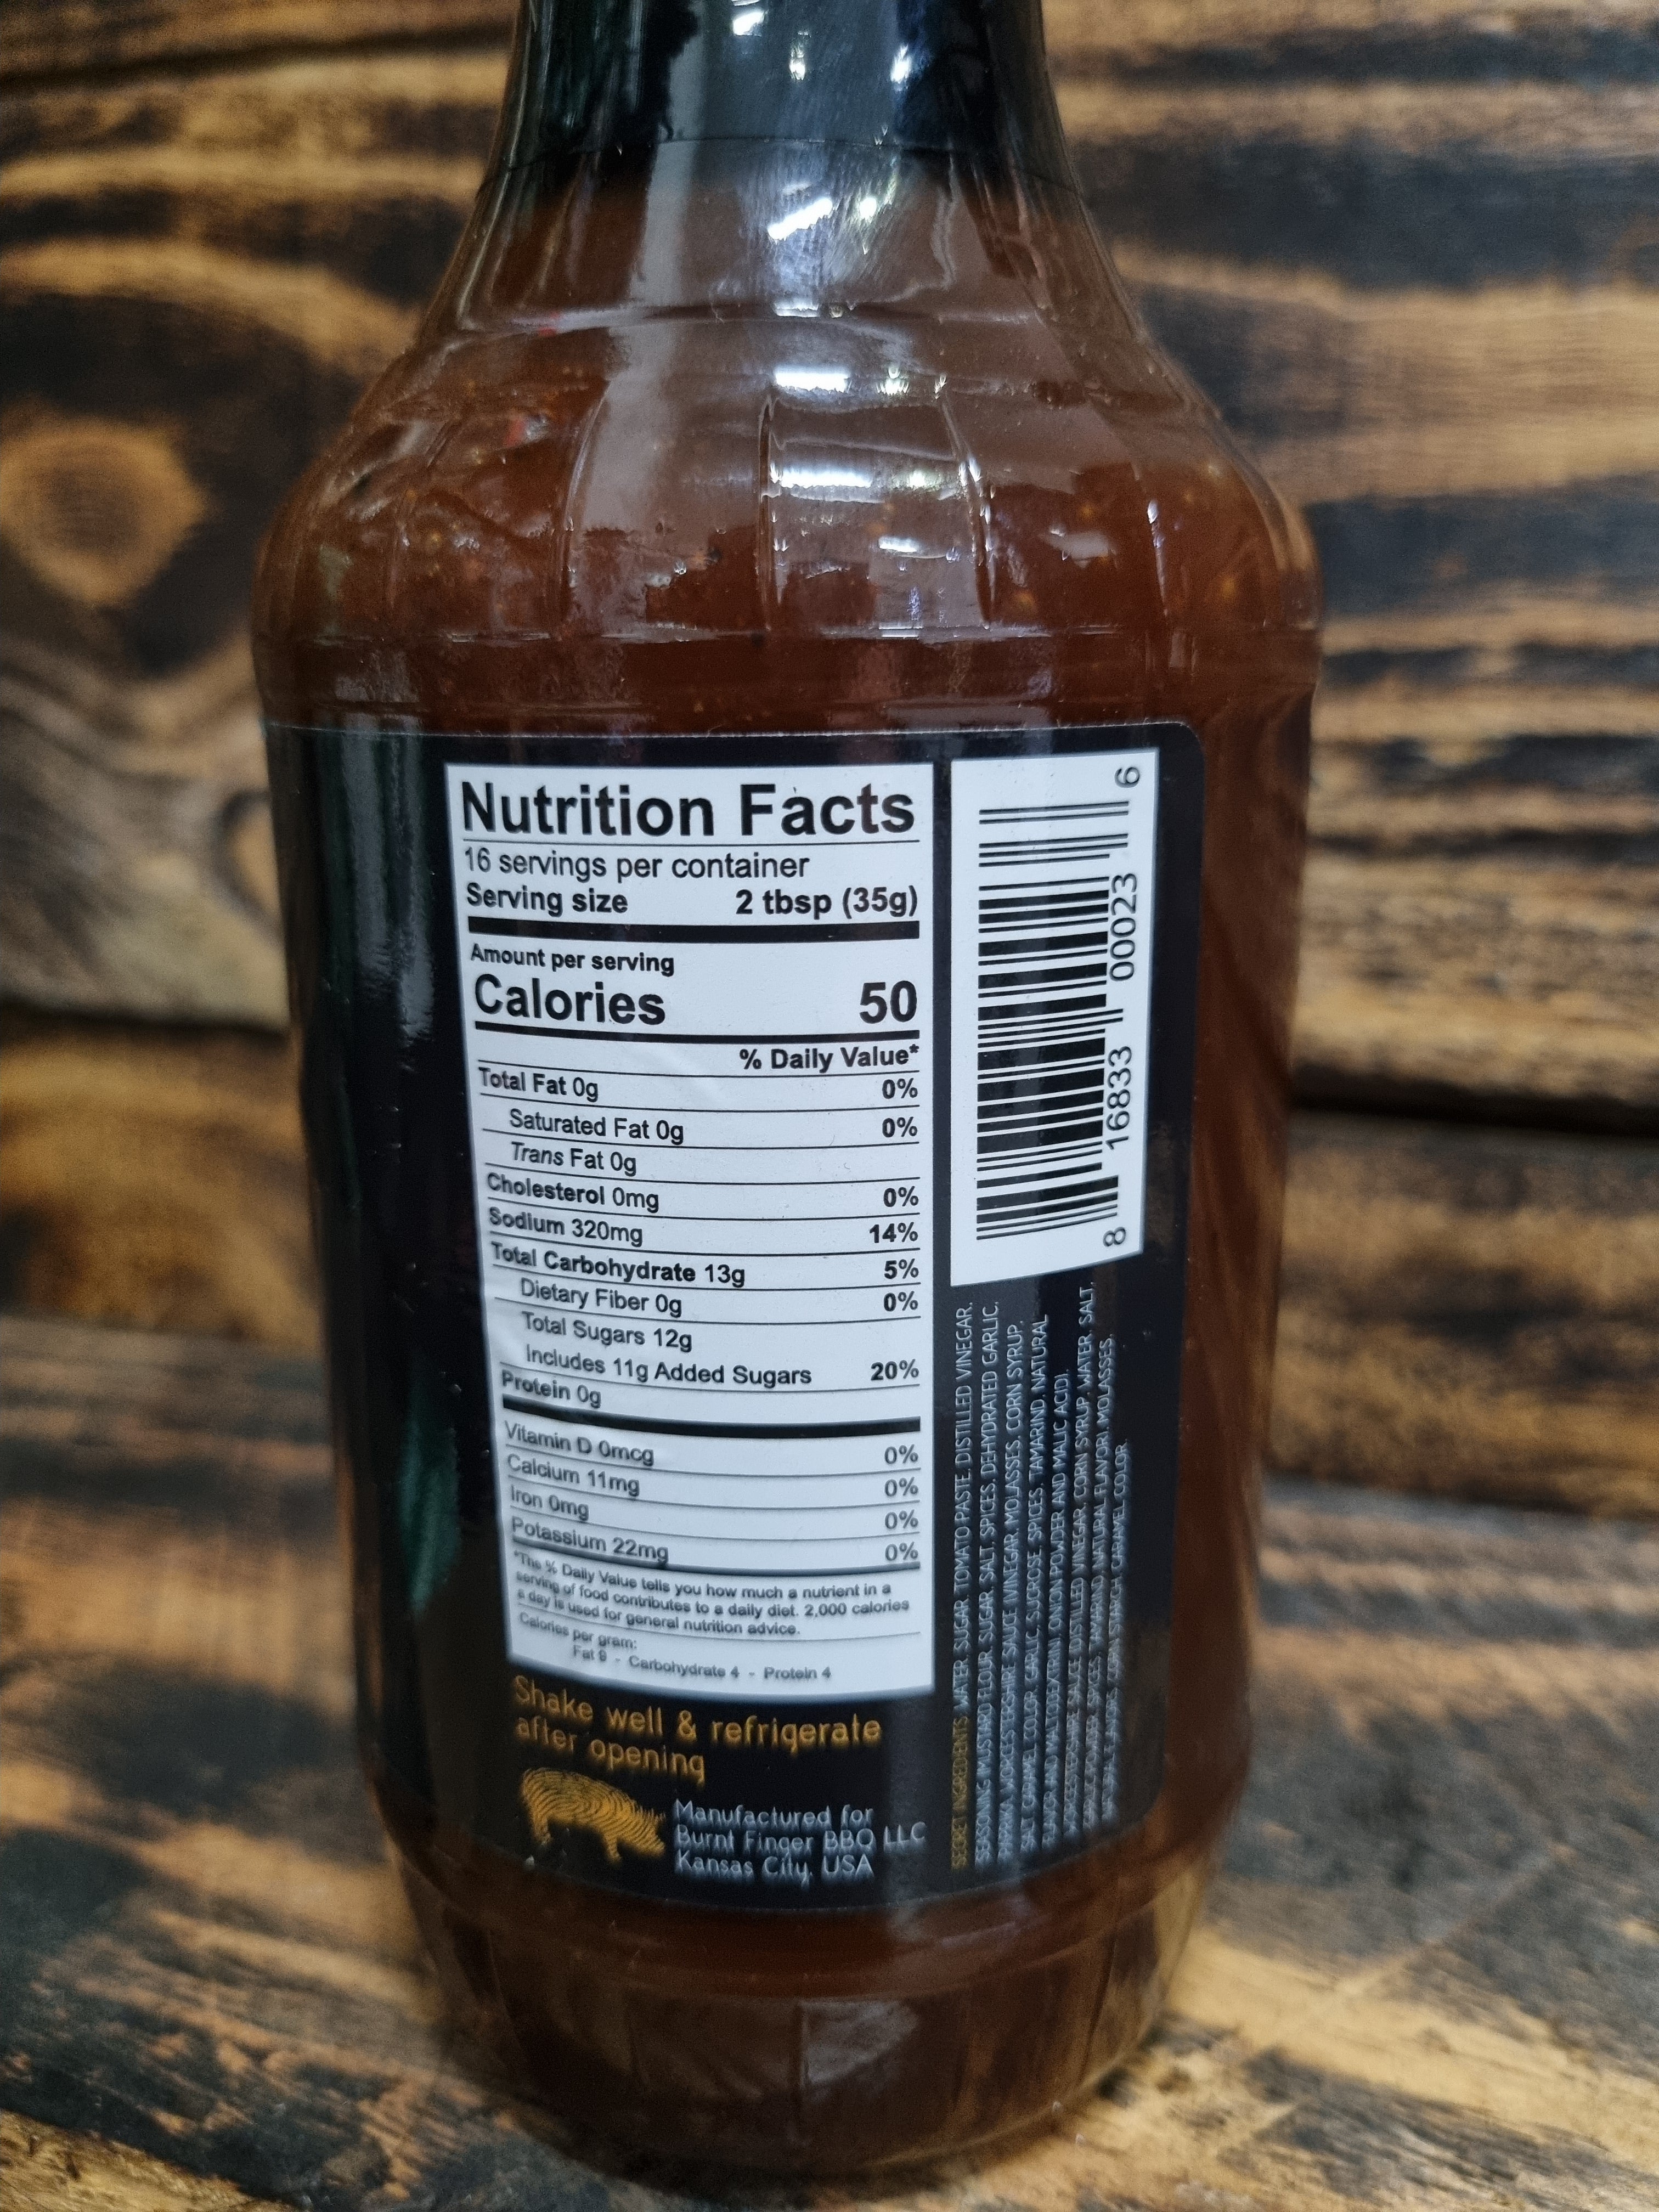 Smokey KC Barbecue Sauce by Burnt Finger BBQ 558g